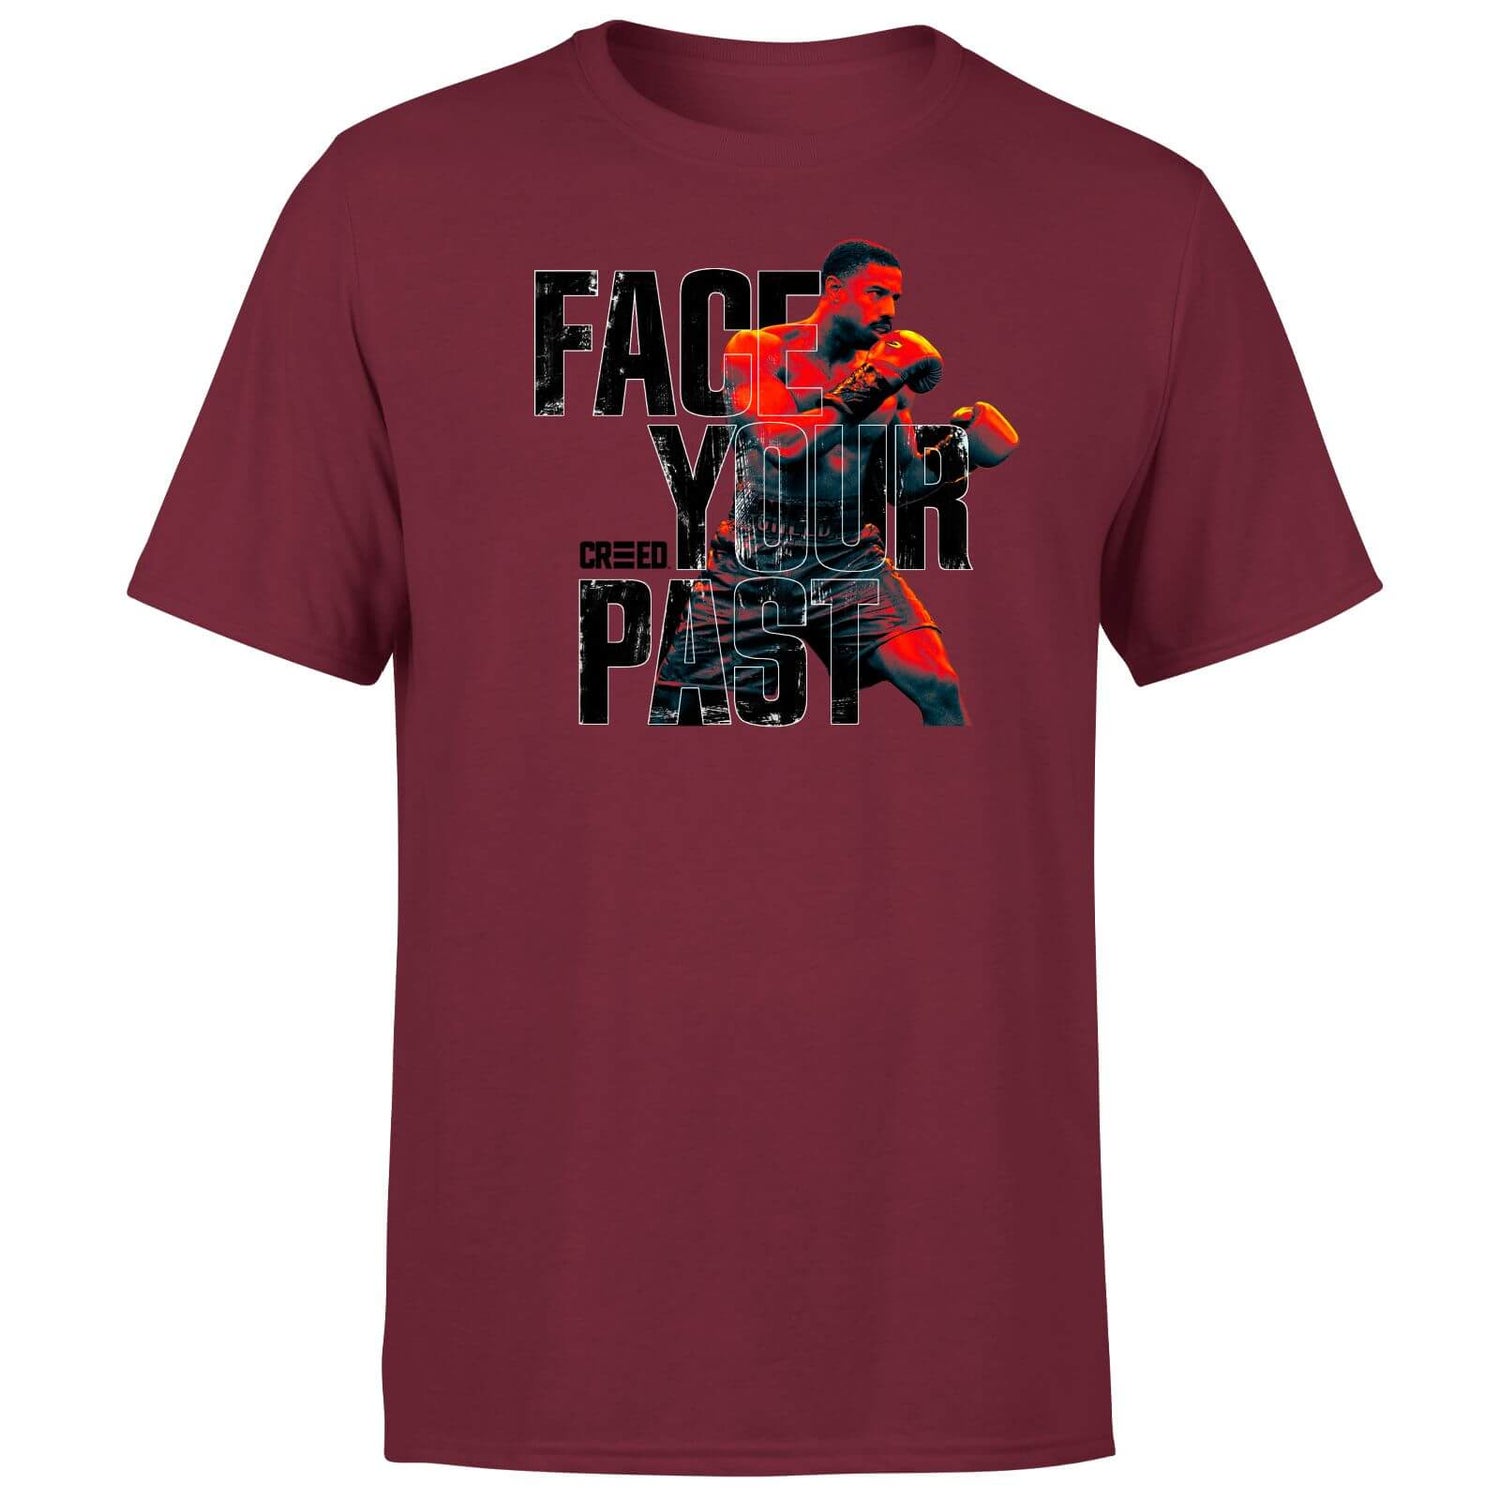 Creed Face Your Past Men's T-Shirt - Burgundy